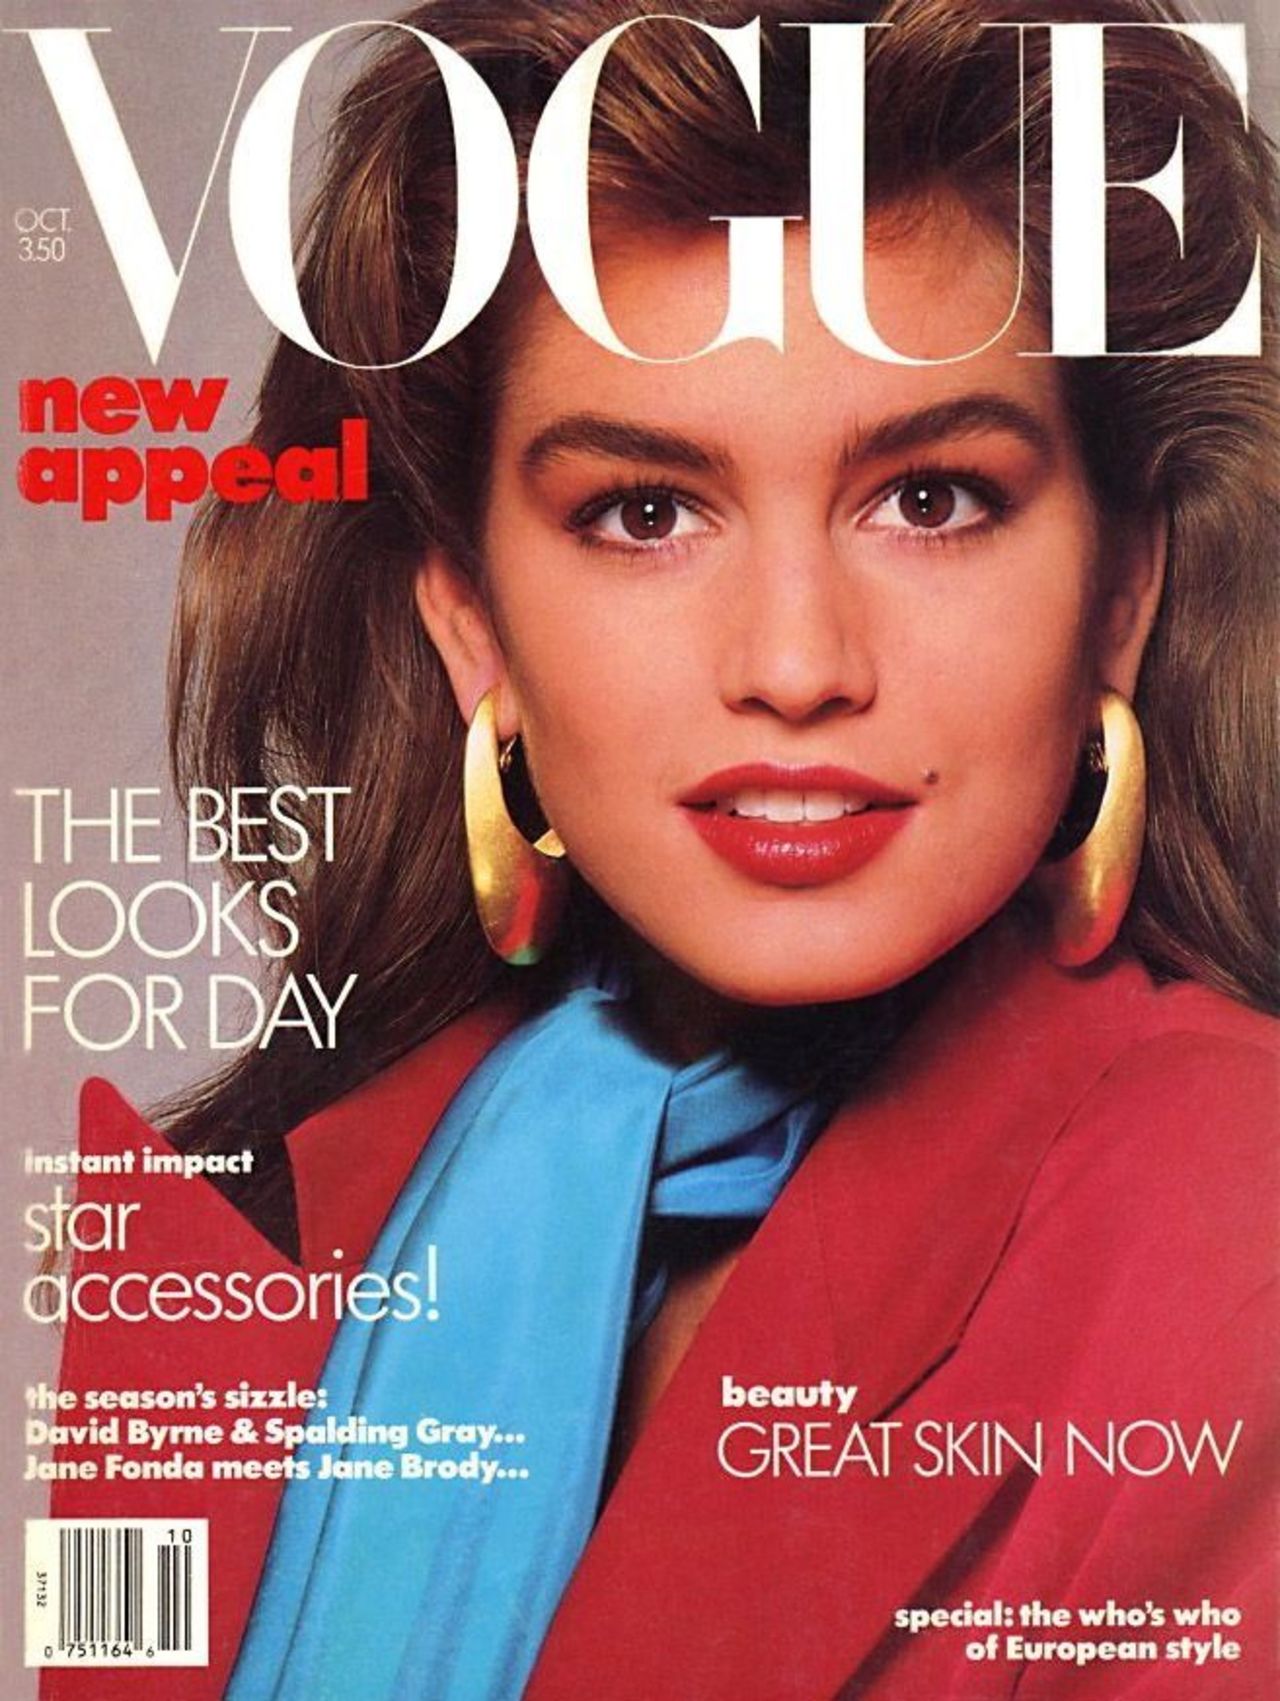 Vogue cover featuring Cindy Crawford, shot by Richard Avedon (1986)